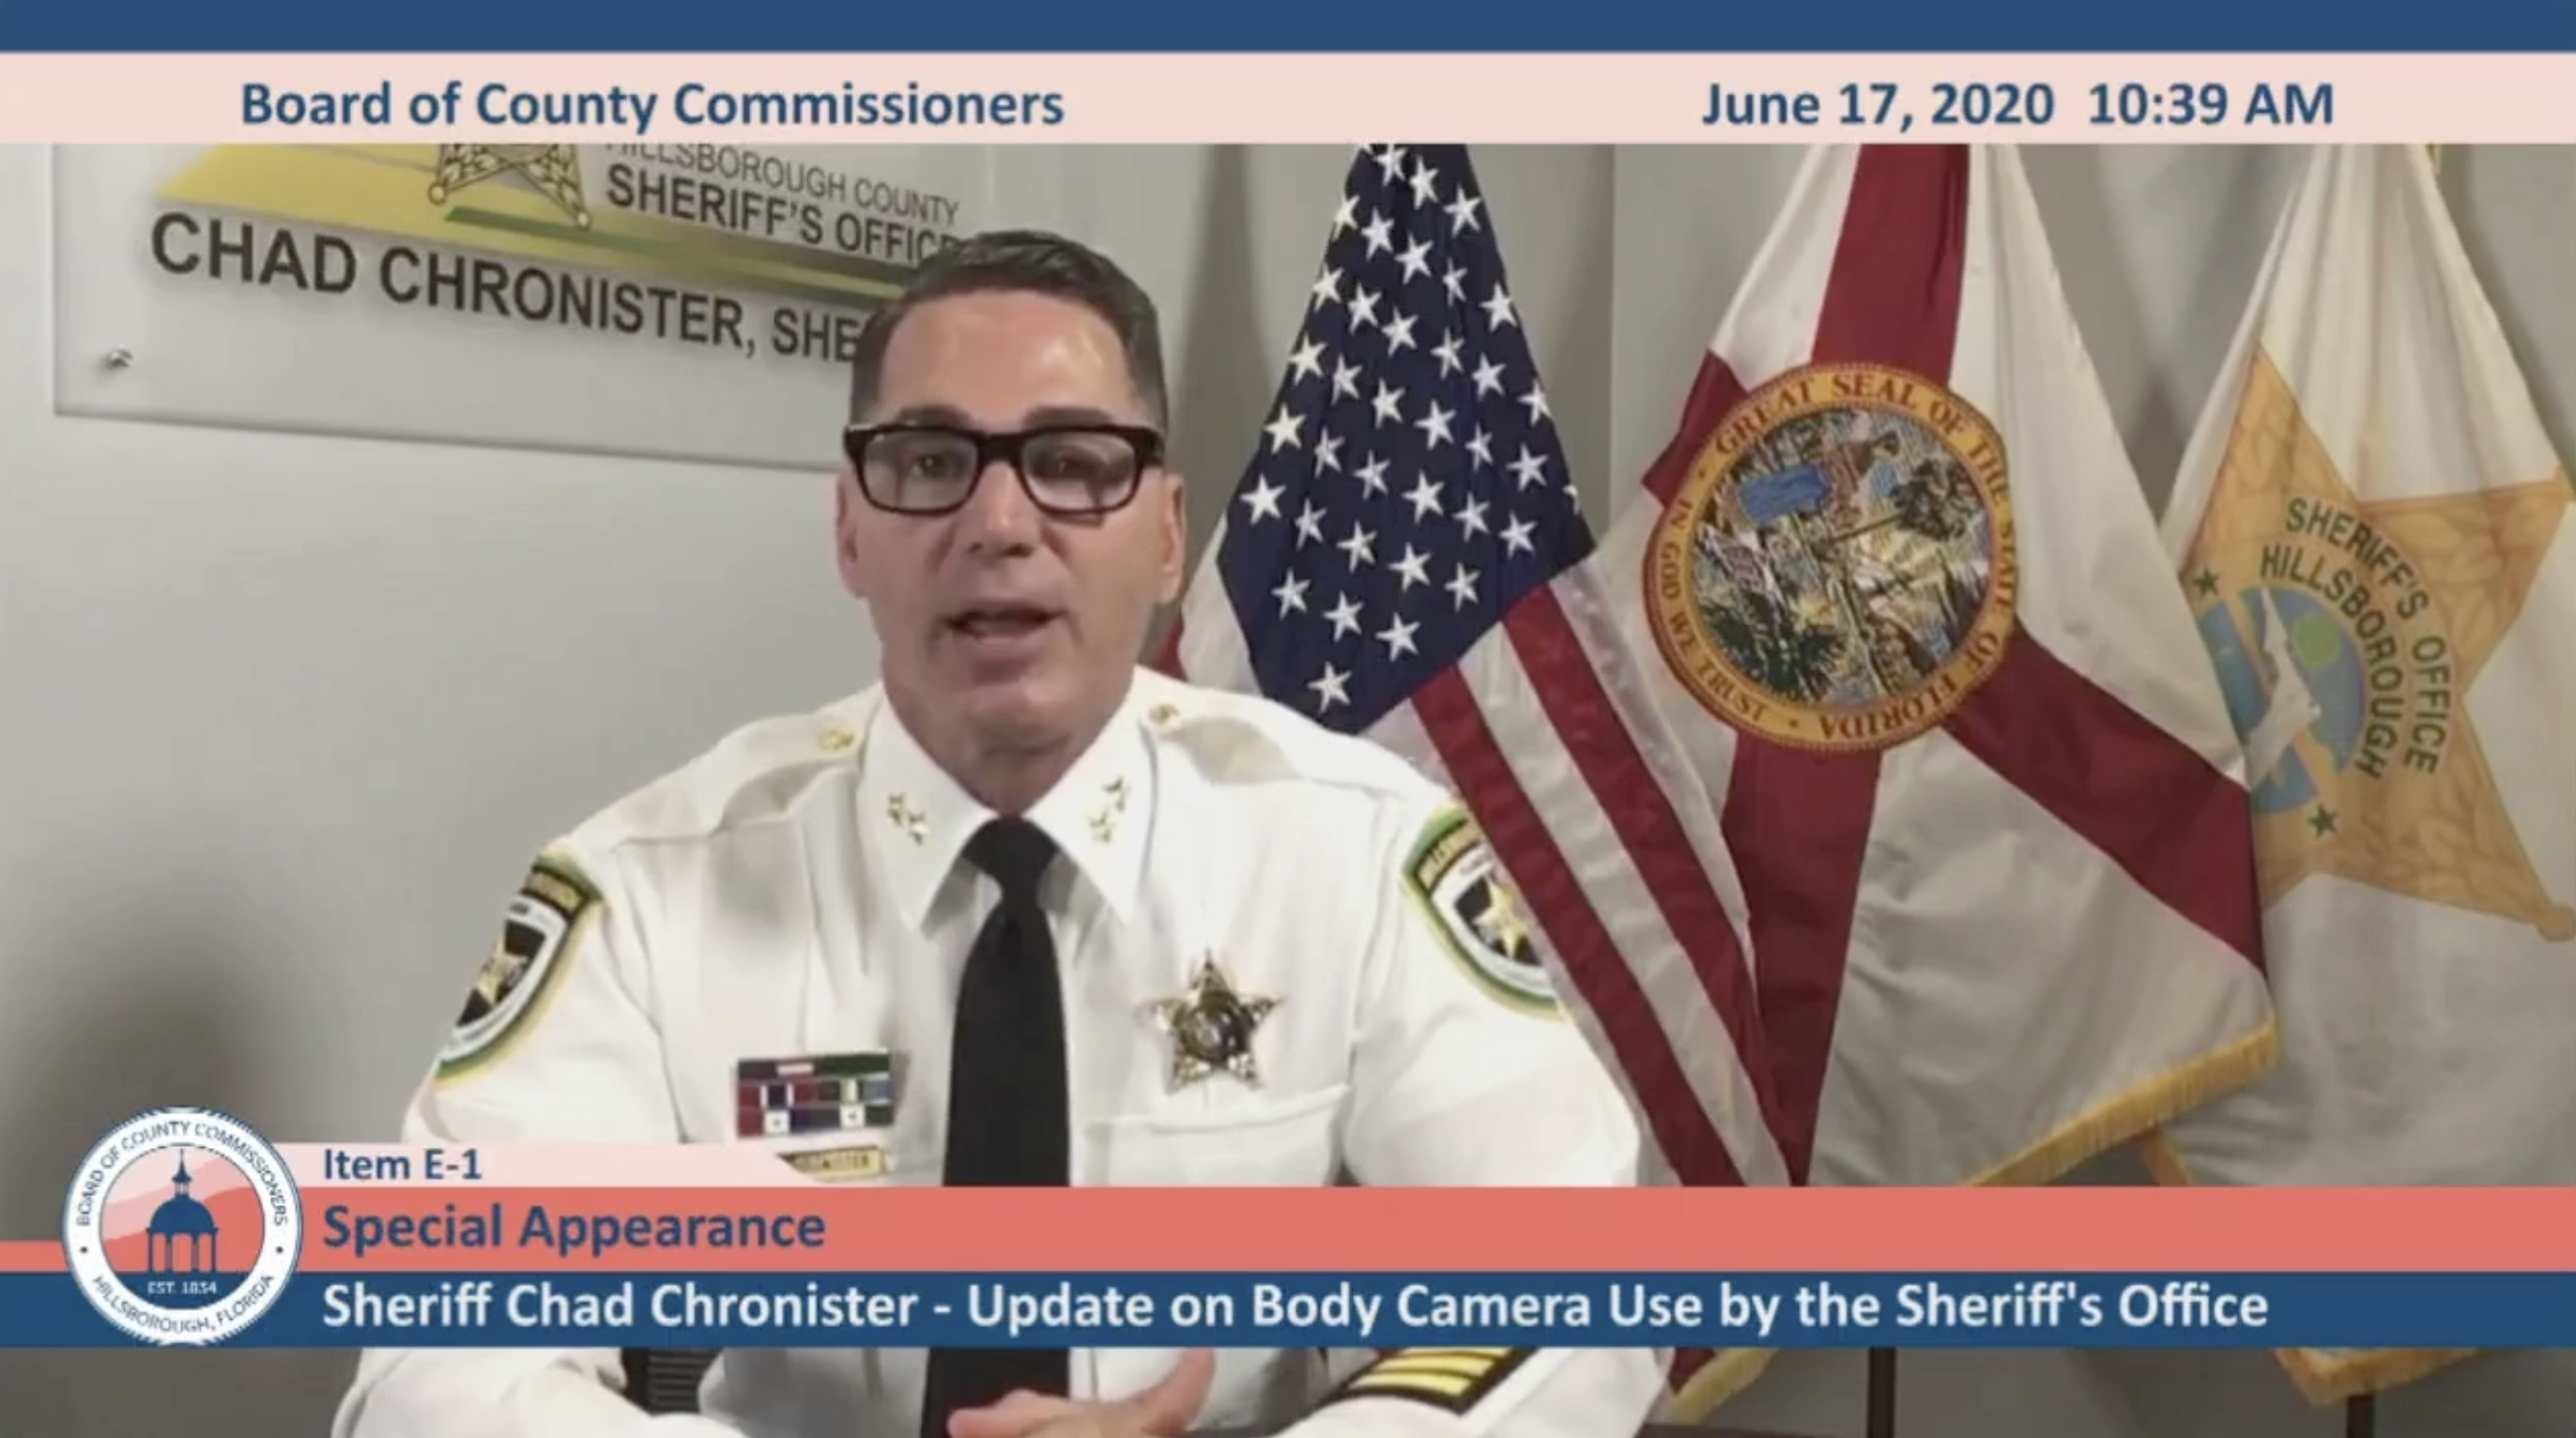 Sheriff Chad Chronister requests body cameras from Hillsborough BOCC